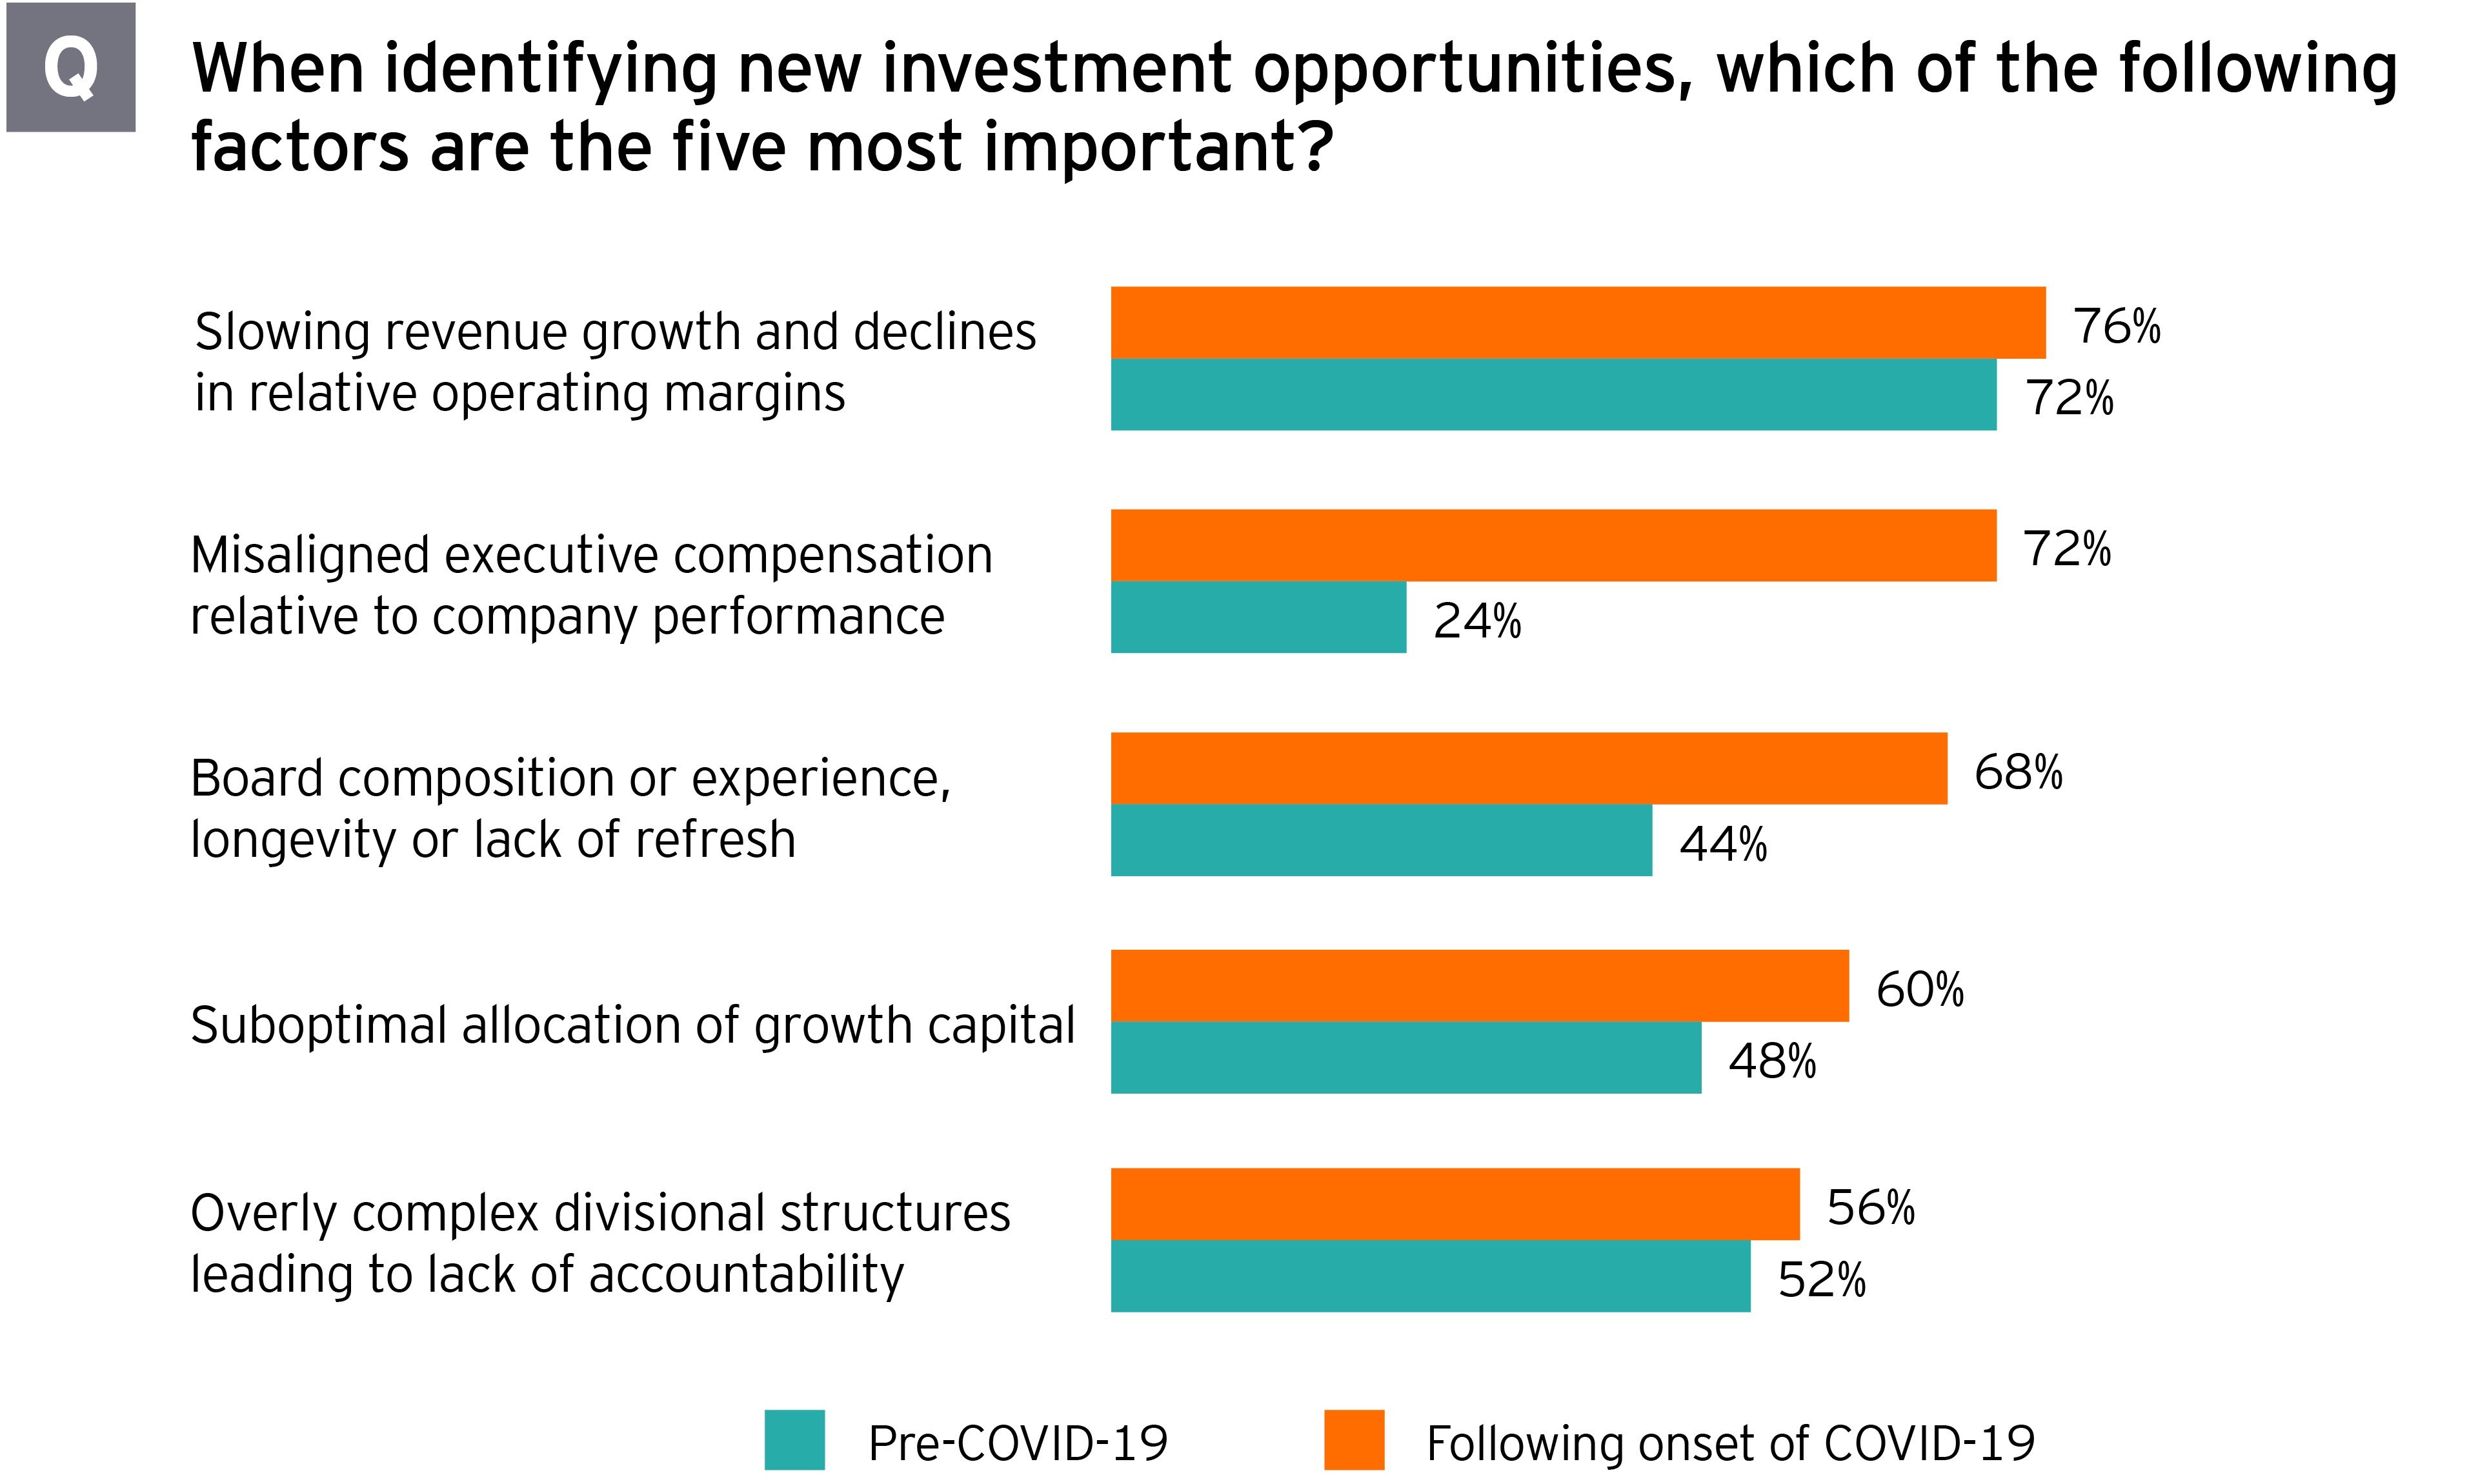 Top factors when identifying new investment opportunities